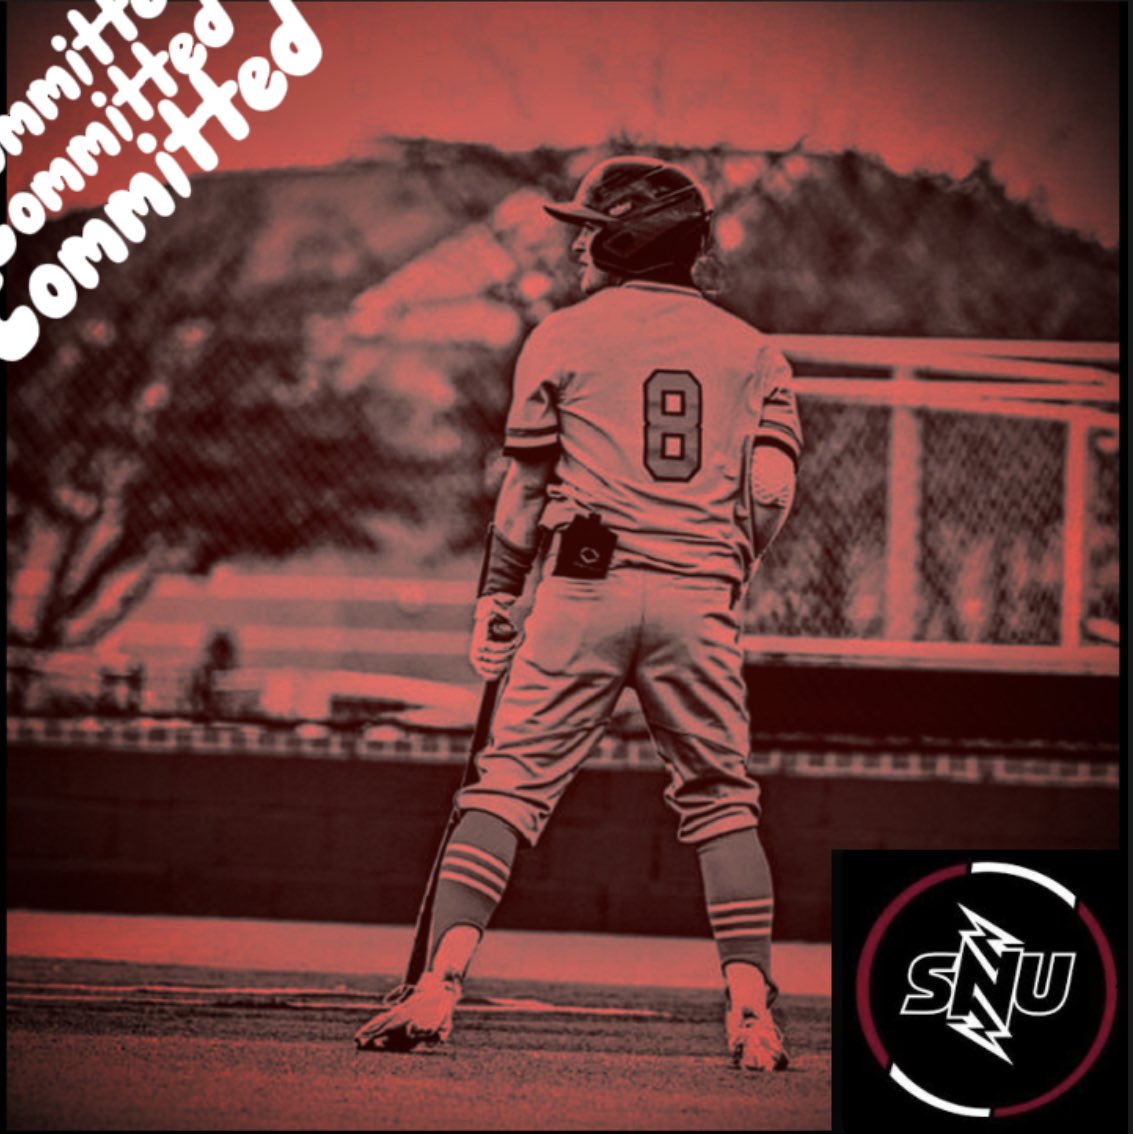 I’m excited to announce that I’m going to continue my academic and Athletic career at Southern Nazarene University. I would like to thank God , My family and my friends and coaches that have helped me through the process.#Boltsups❗️⚡️@Kyle_casey5 @RaiderDugout @kirb_dbatdenton